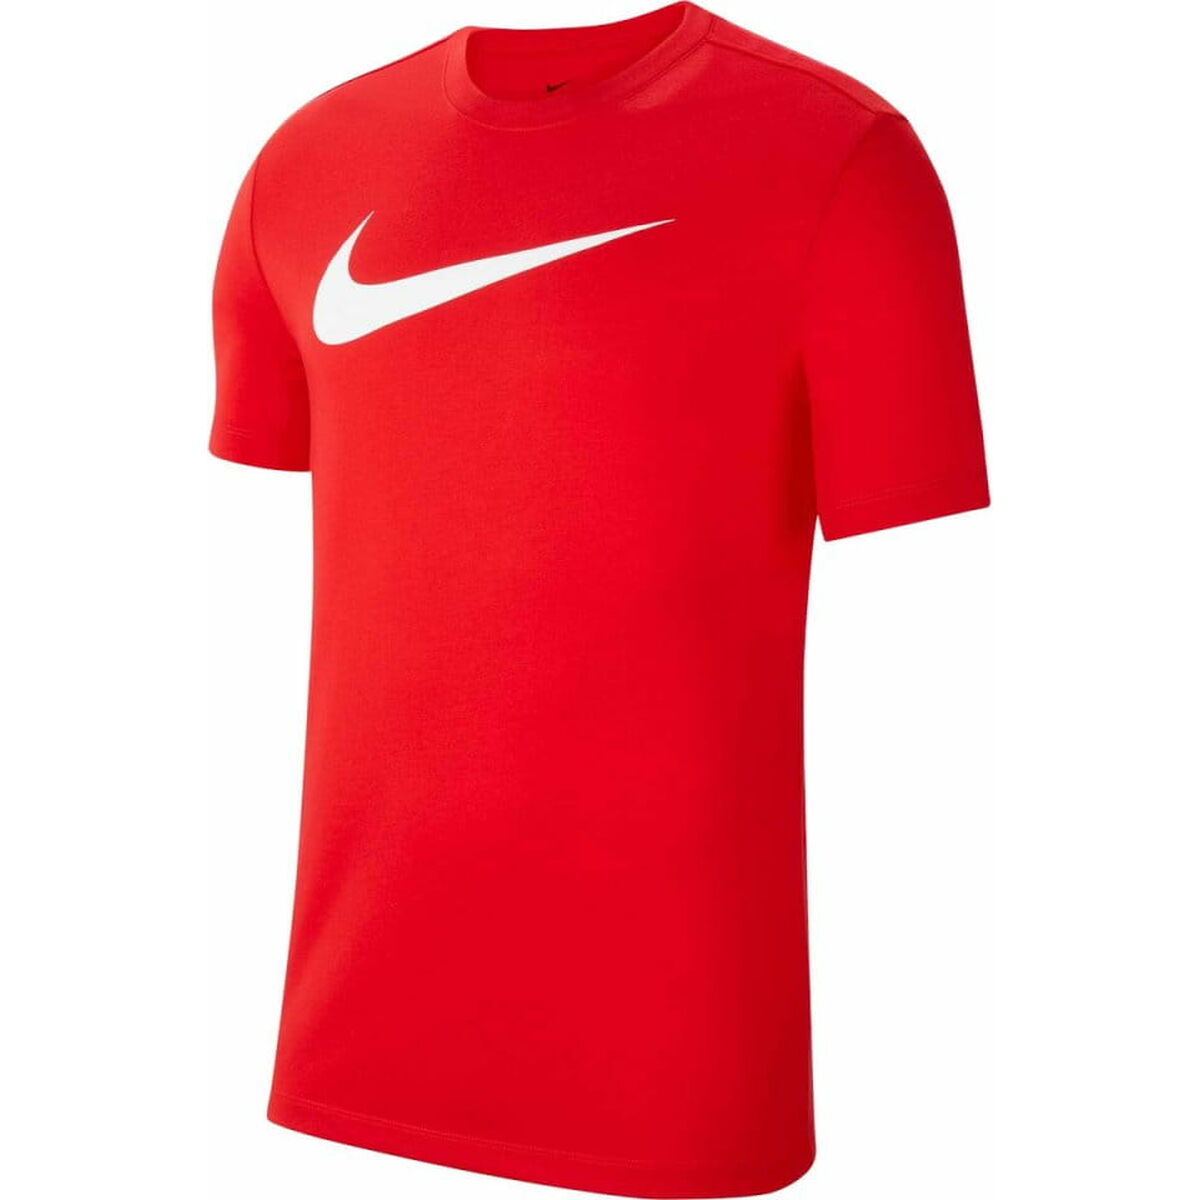 Short Sleeve T-Shirt DF PARL20 SS TEE Nike CW6941 657 Red-Fashion | Accessories > Clothes and Shoes > T-shirts-Nike-Urbanheer